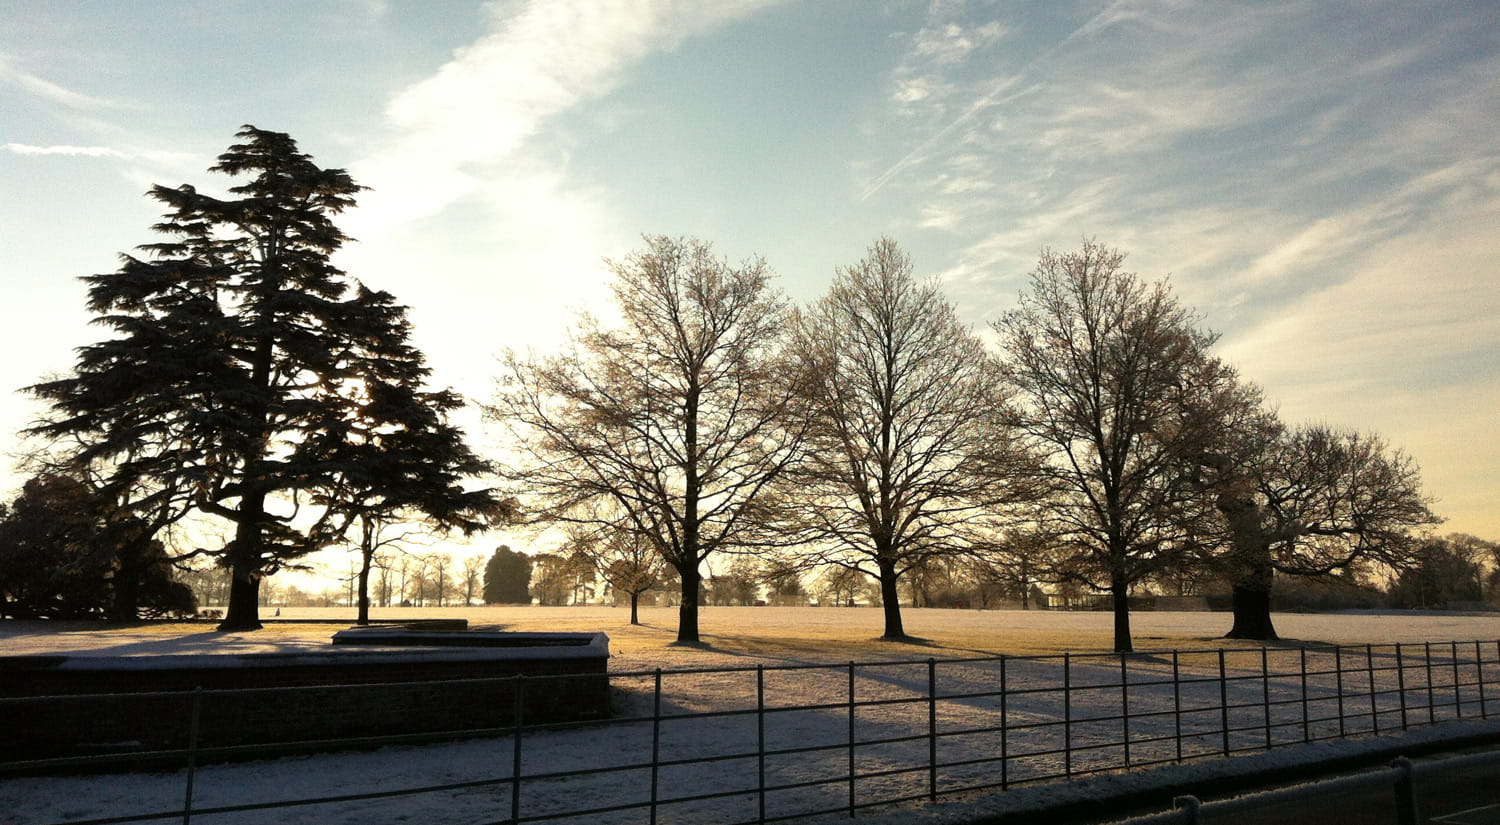 Winter morning at Wivenhoe Park